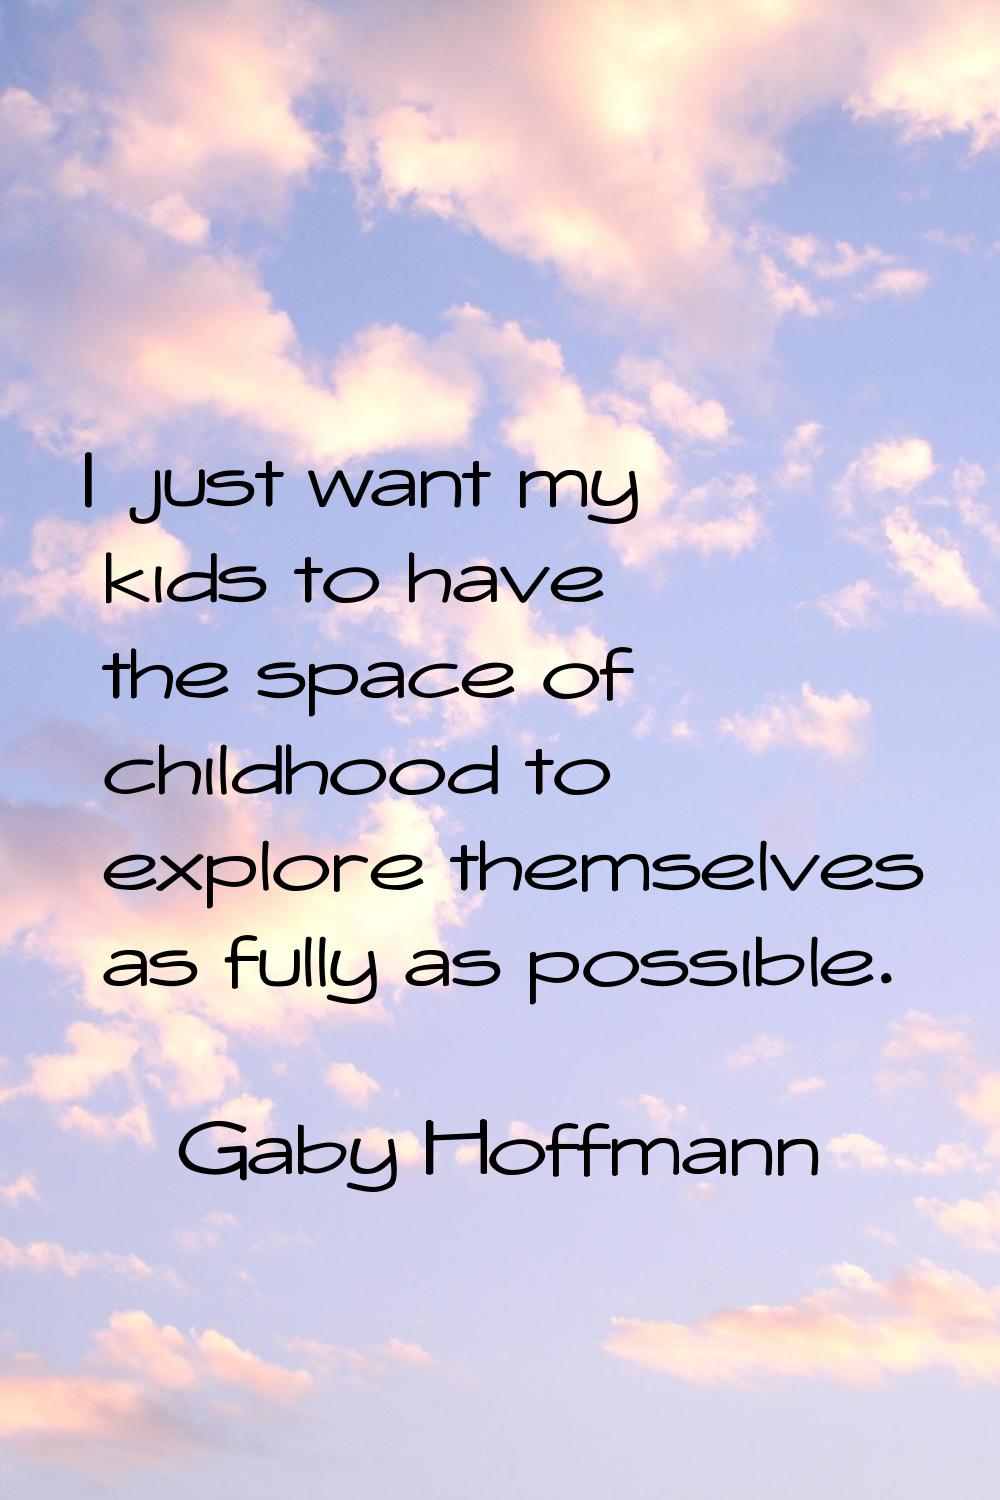 I just want my kids to have the space of childhood to explore themselves as fully as possible.